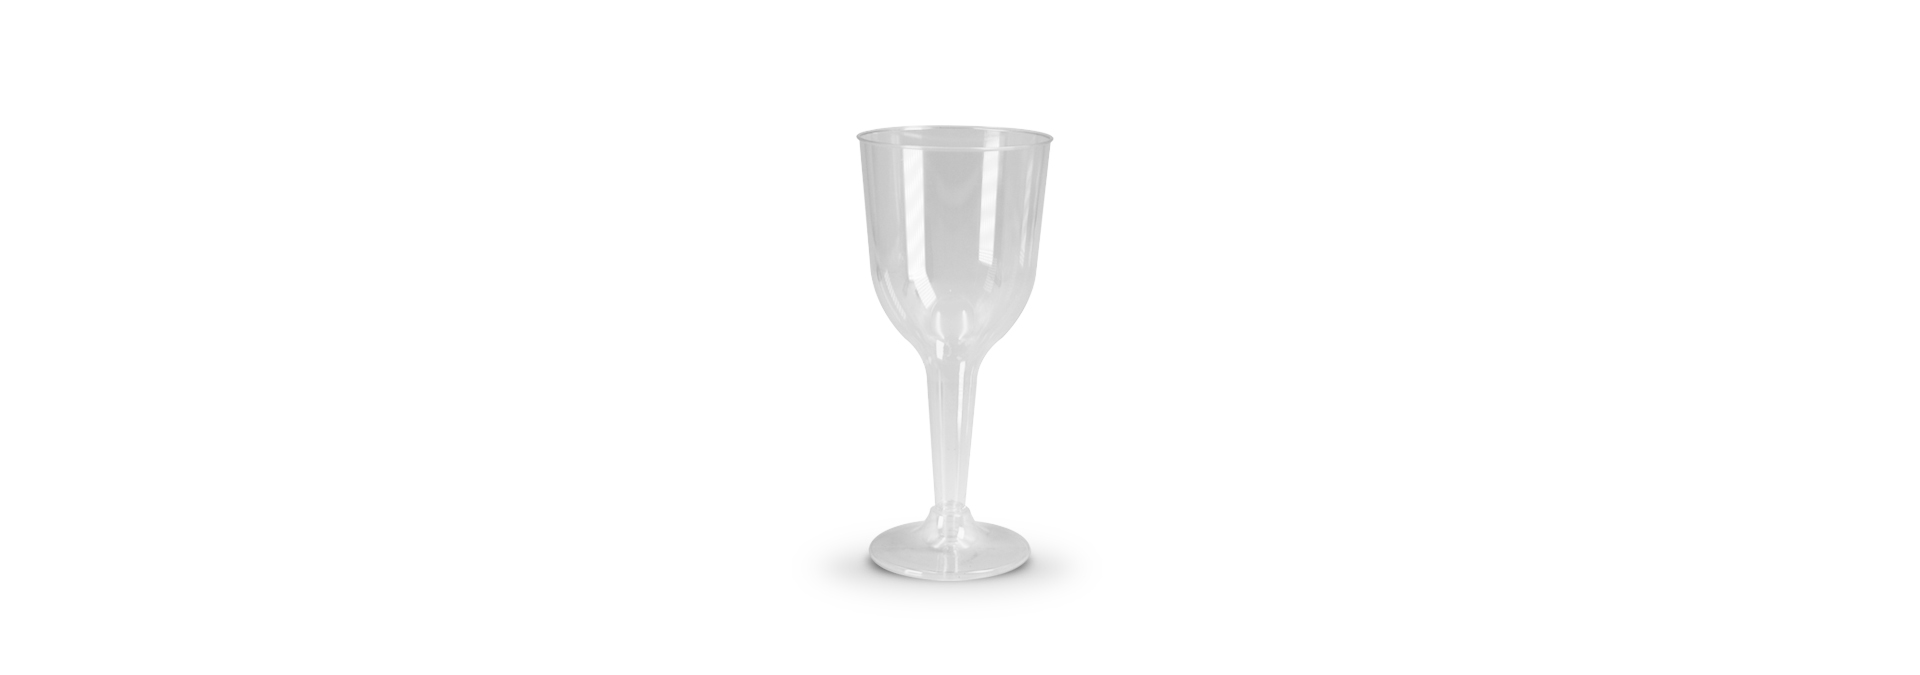 10 ounces red wine glass